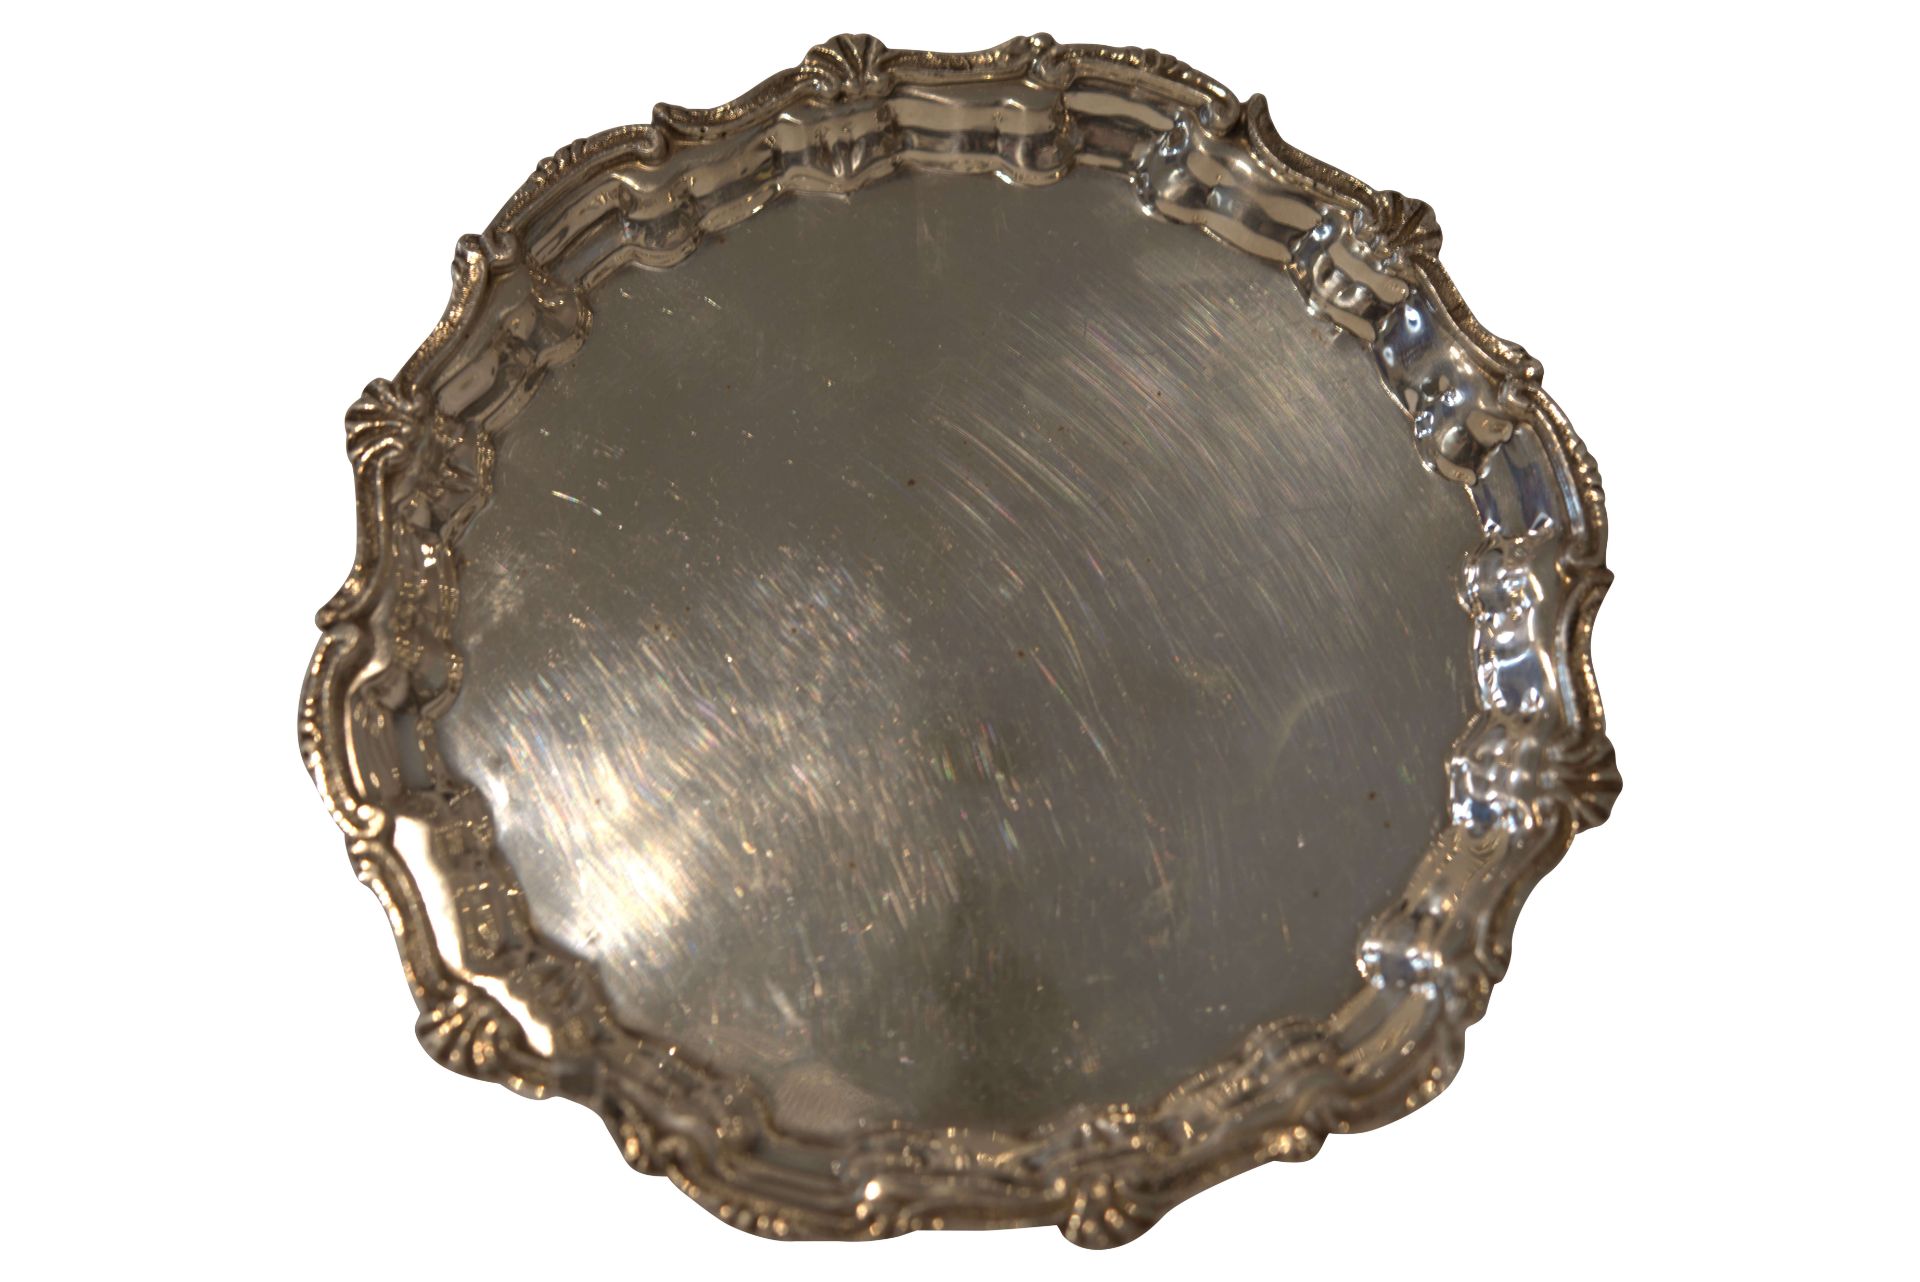 Silber Teller mit Ornament | Silver Plate with Ornament